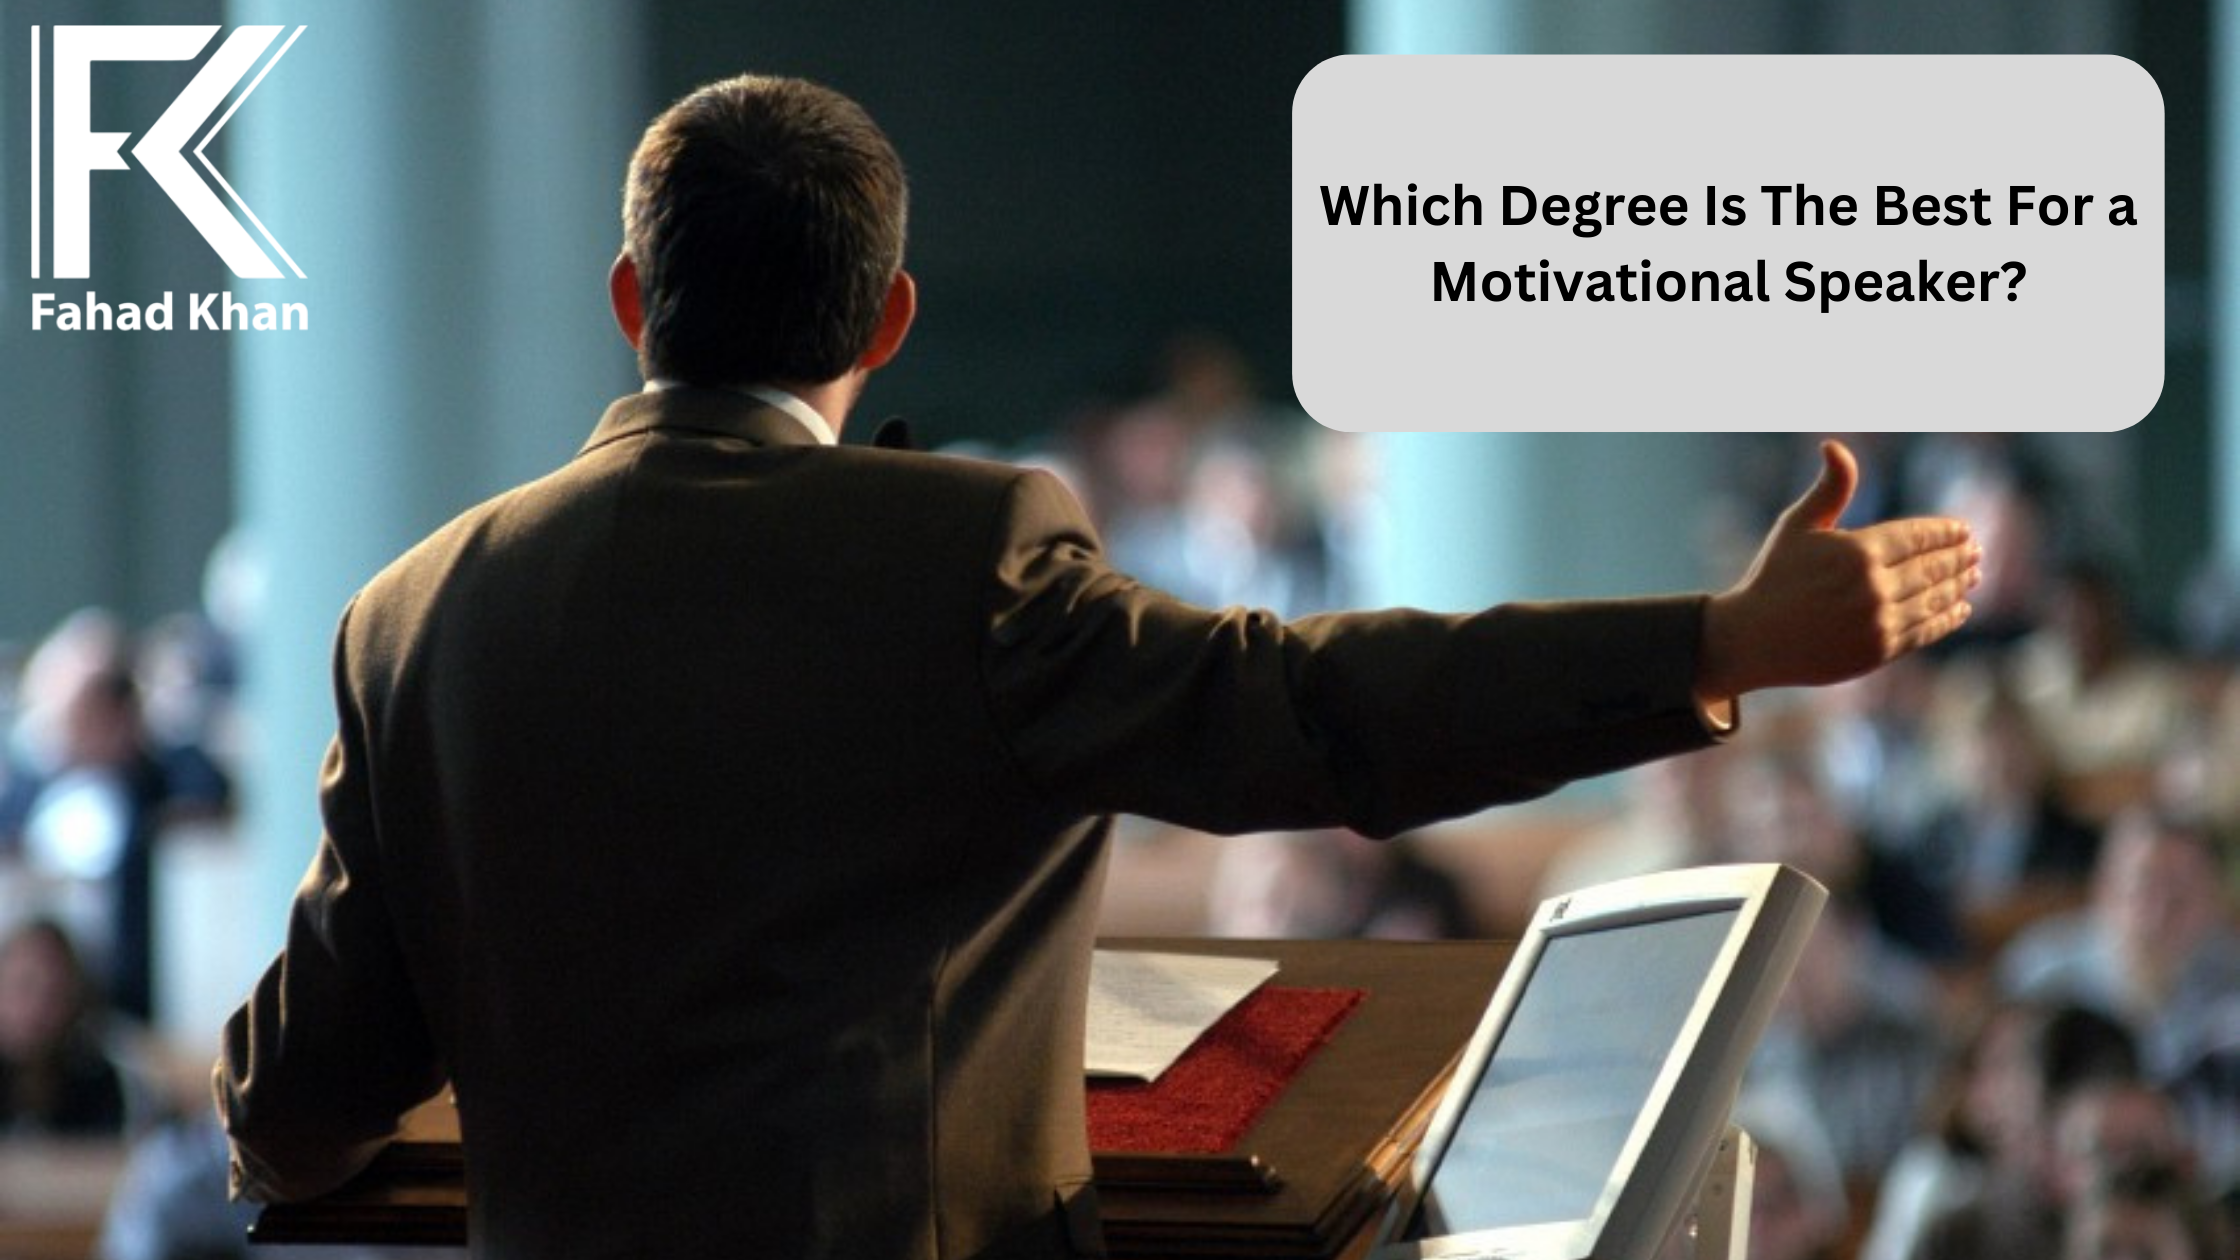 Which Degree Is The Best For a Motivational Speaker?